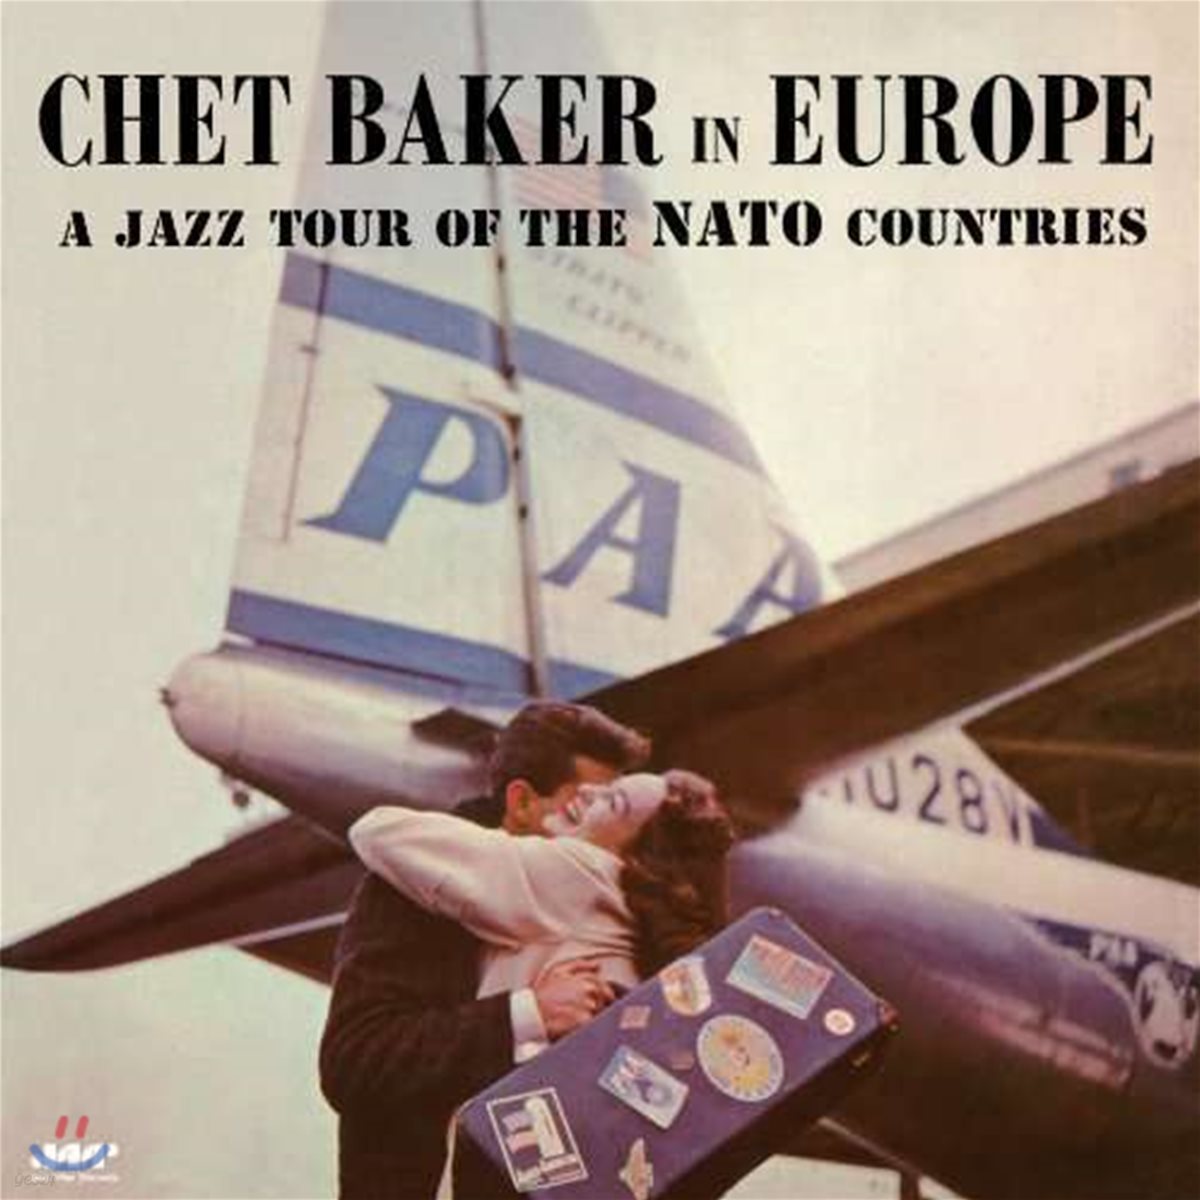 Chet Baker (쳇 베이커) - A Jazz Tour Of The NATO Countries [LP]